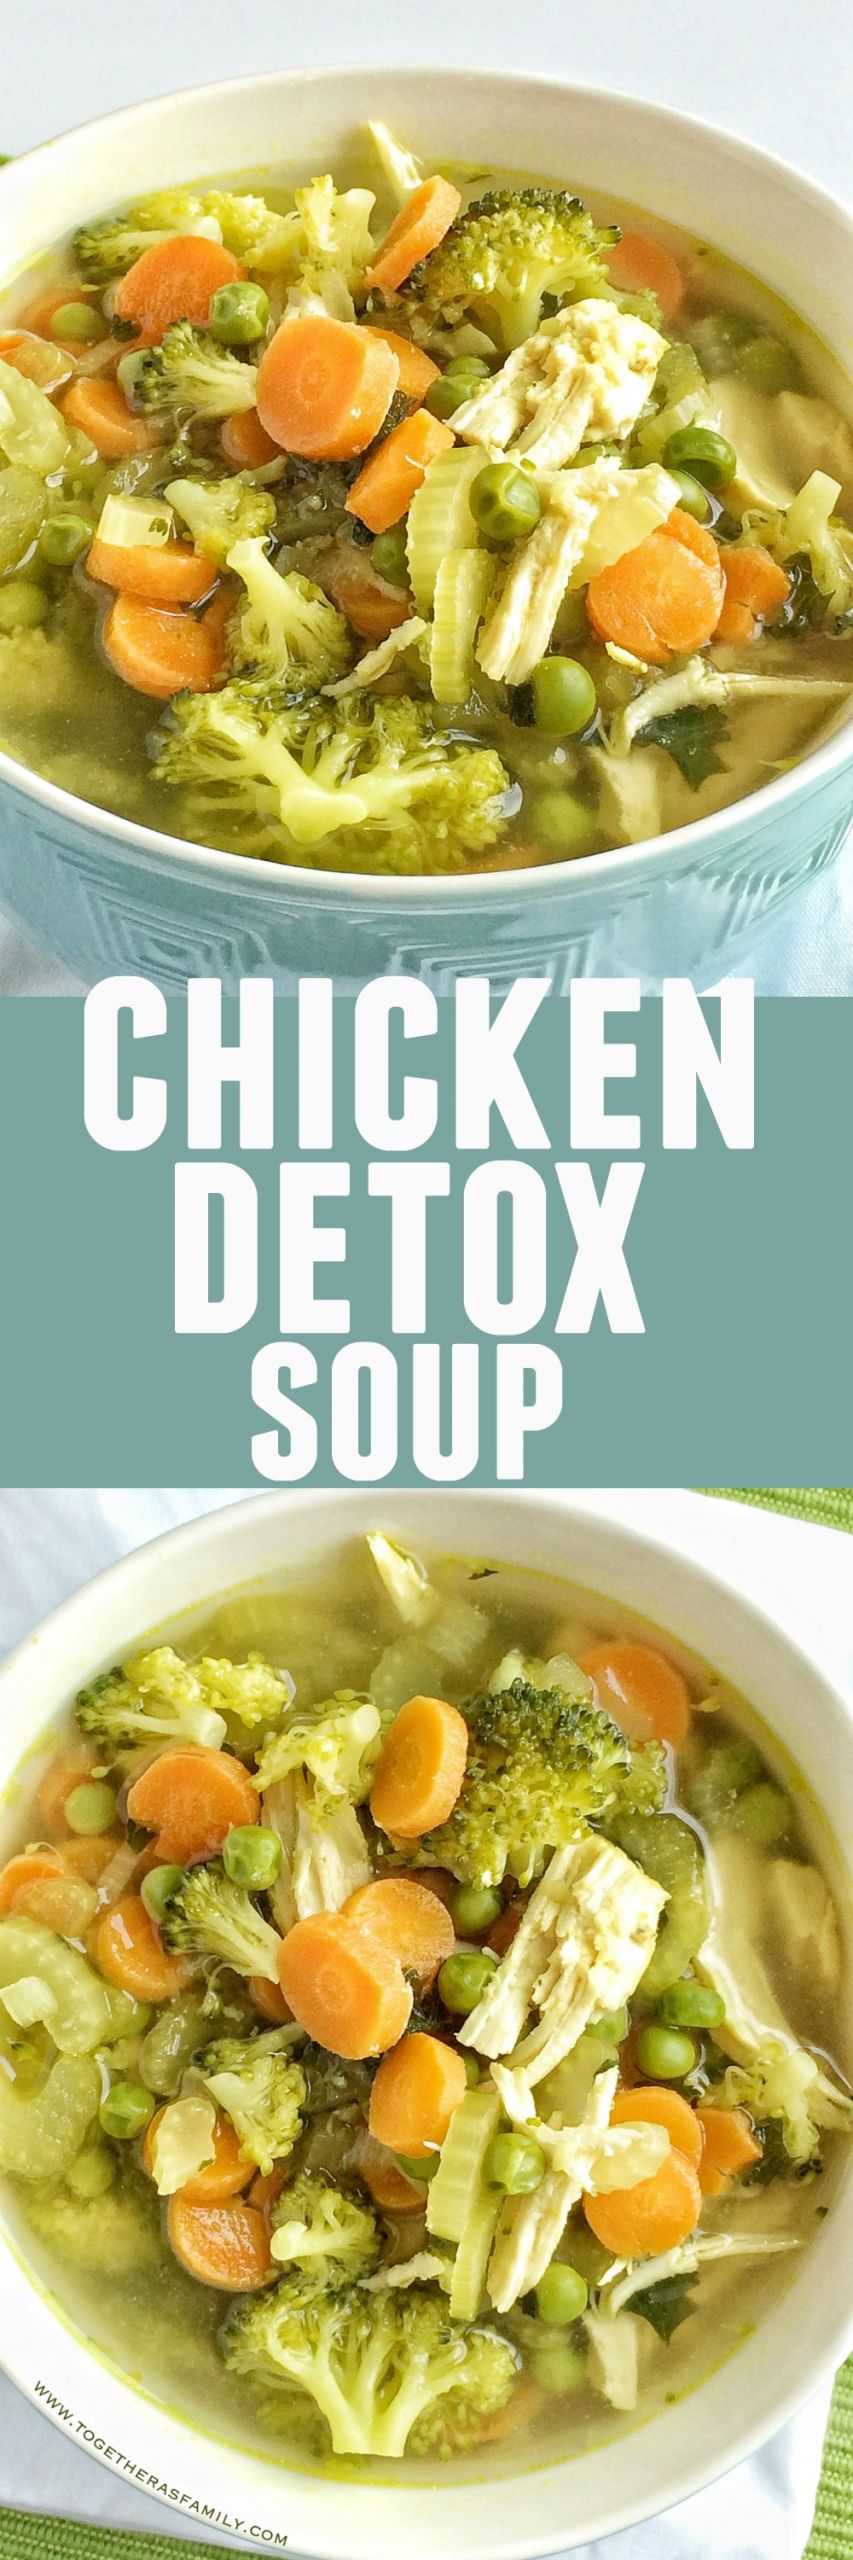 Low Fat Recipes With Chicken
 Chicken Detox Soup To her as Family